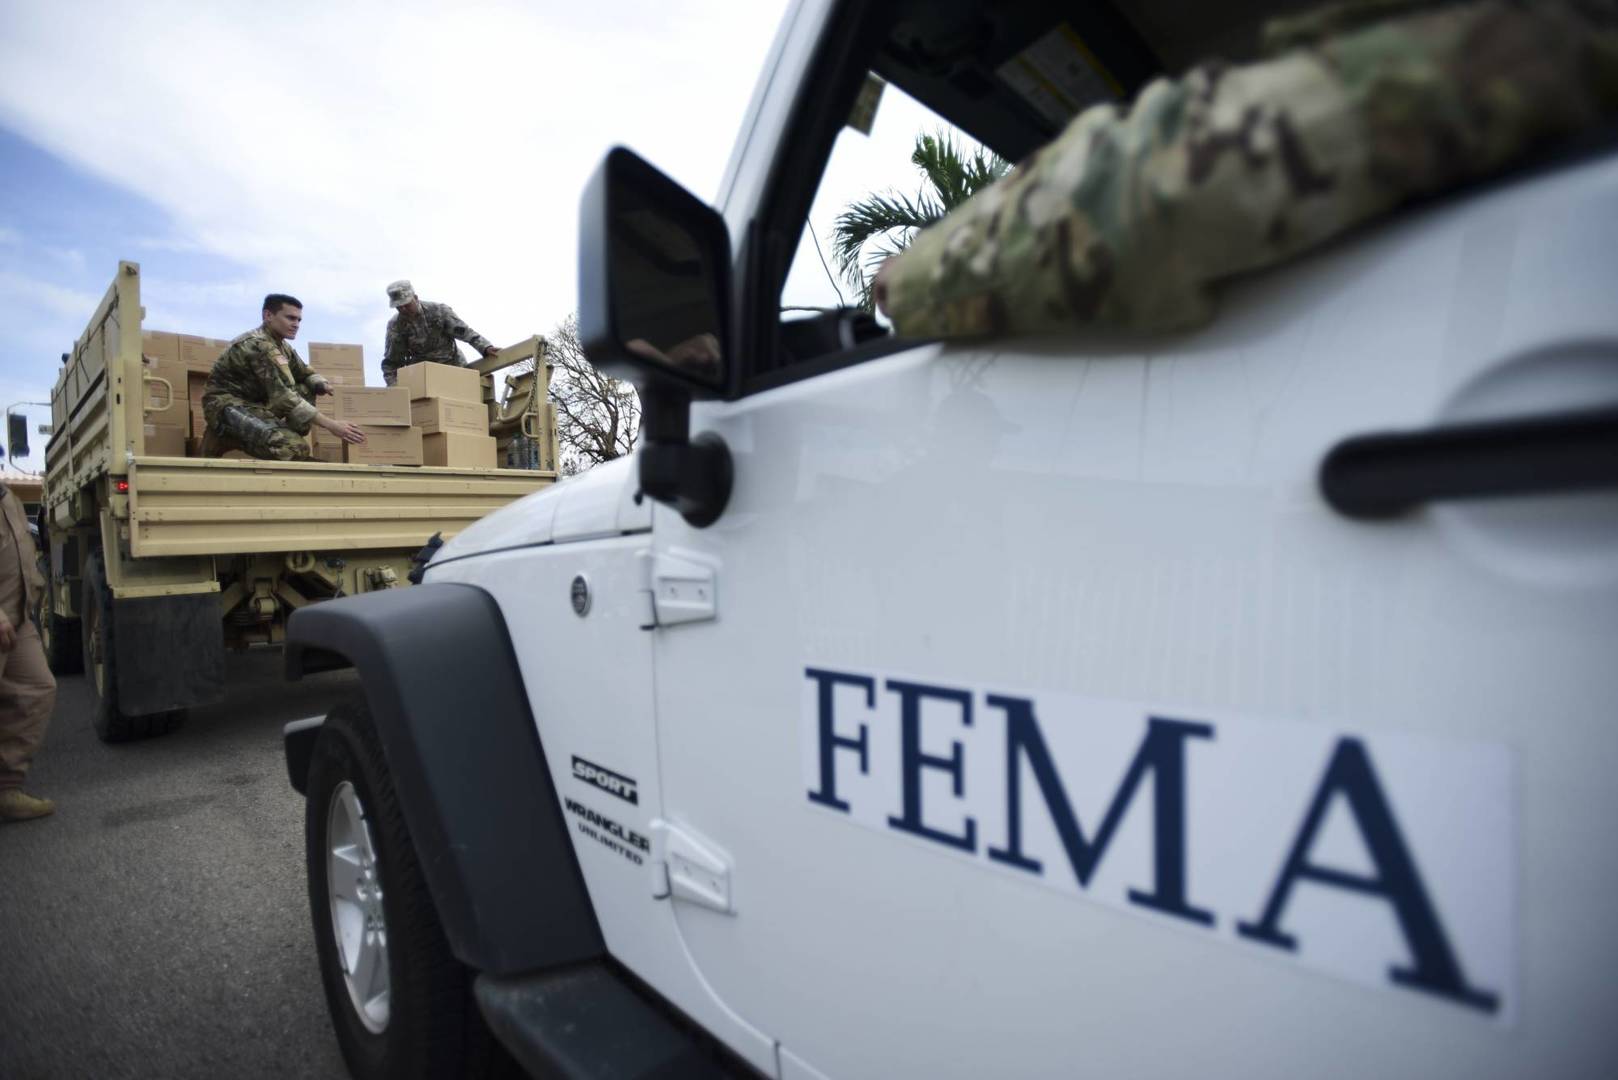 FILE - In this Oct. 5, 2017 file photo, Department of Homeland Security personnel deliver supplies to Santa Ana community residents in the aftermath of Hurricane Maria in Guayama, Puerto Rico. Federal authorities said Tuesday, Sept. 10, 2019, that they have arrested two former officials of the Federal Emergency Management Authority and the former president of a major disaster relief contractor, accusing them of bribery and fraud in the efforts to restore electricity to Puerto Rico in the wake of Hurricane Maria. (AP Photo/Carlos Giusti, File)